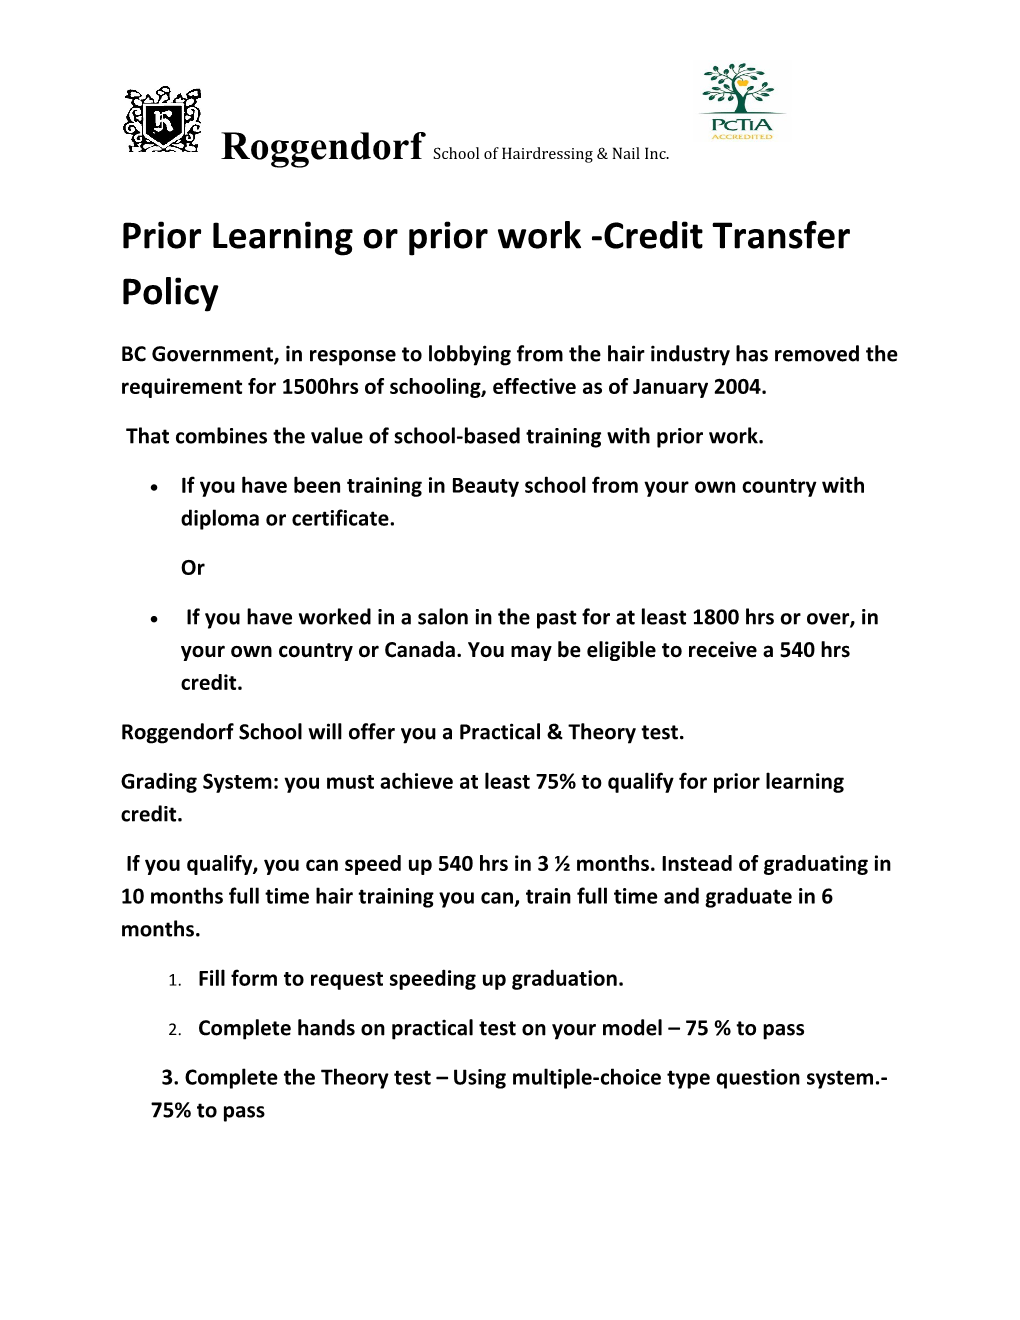 Prior Learning Or Prior Work -Credit Transfer Policy